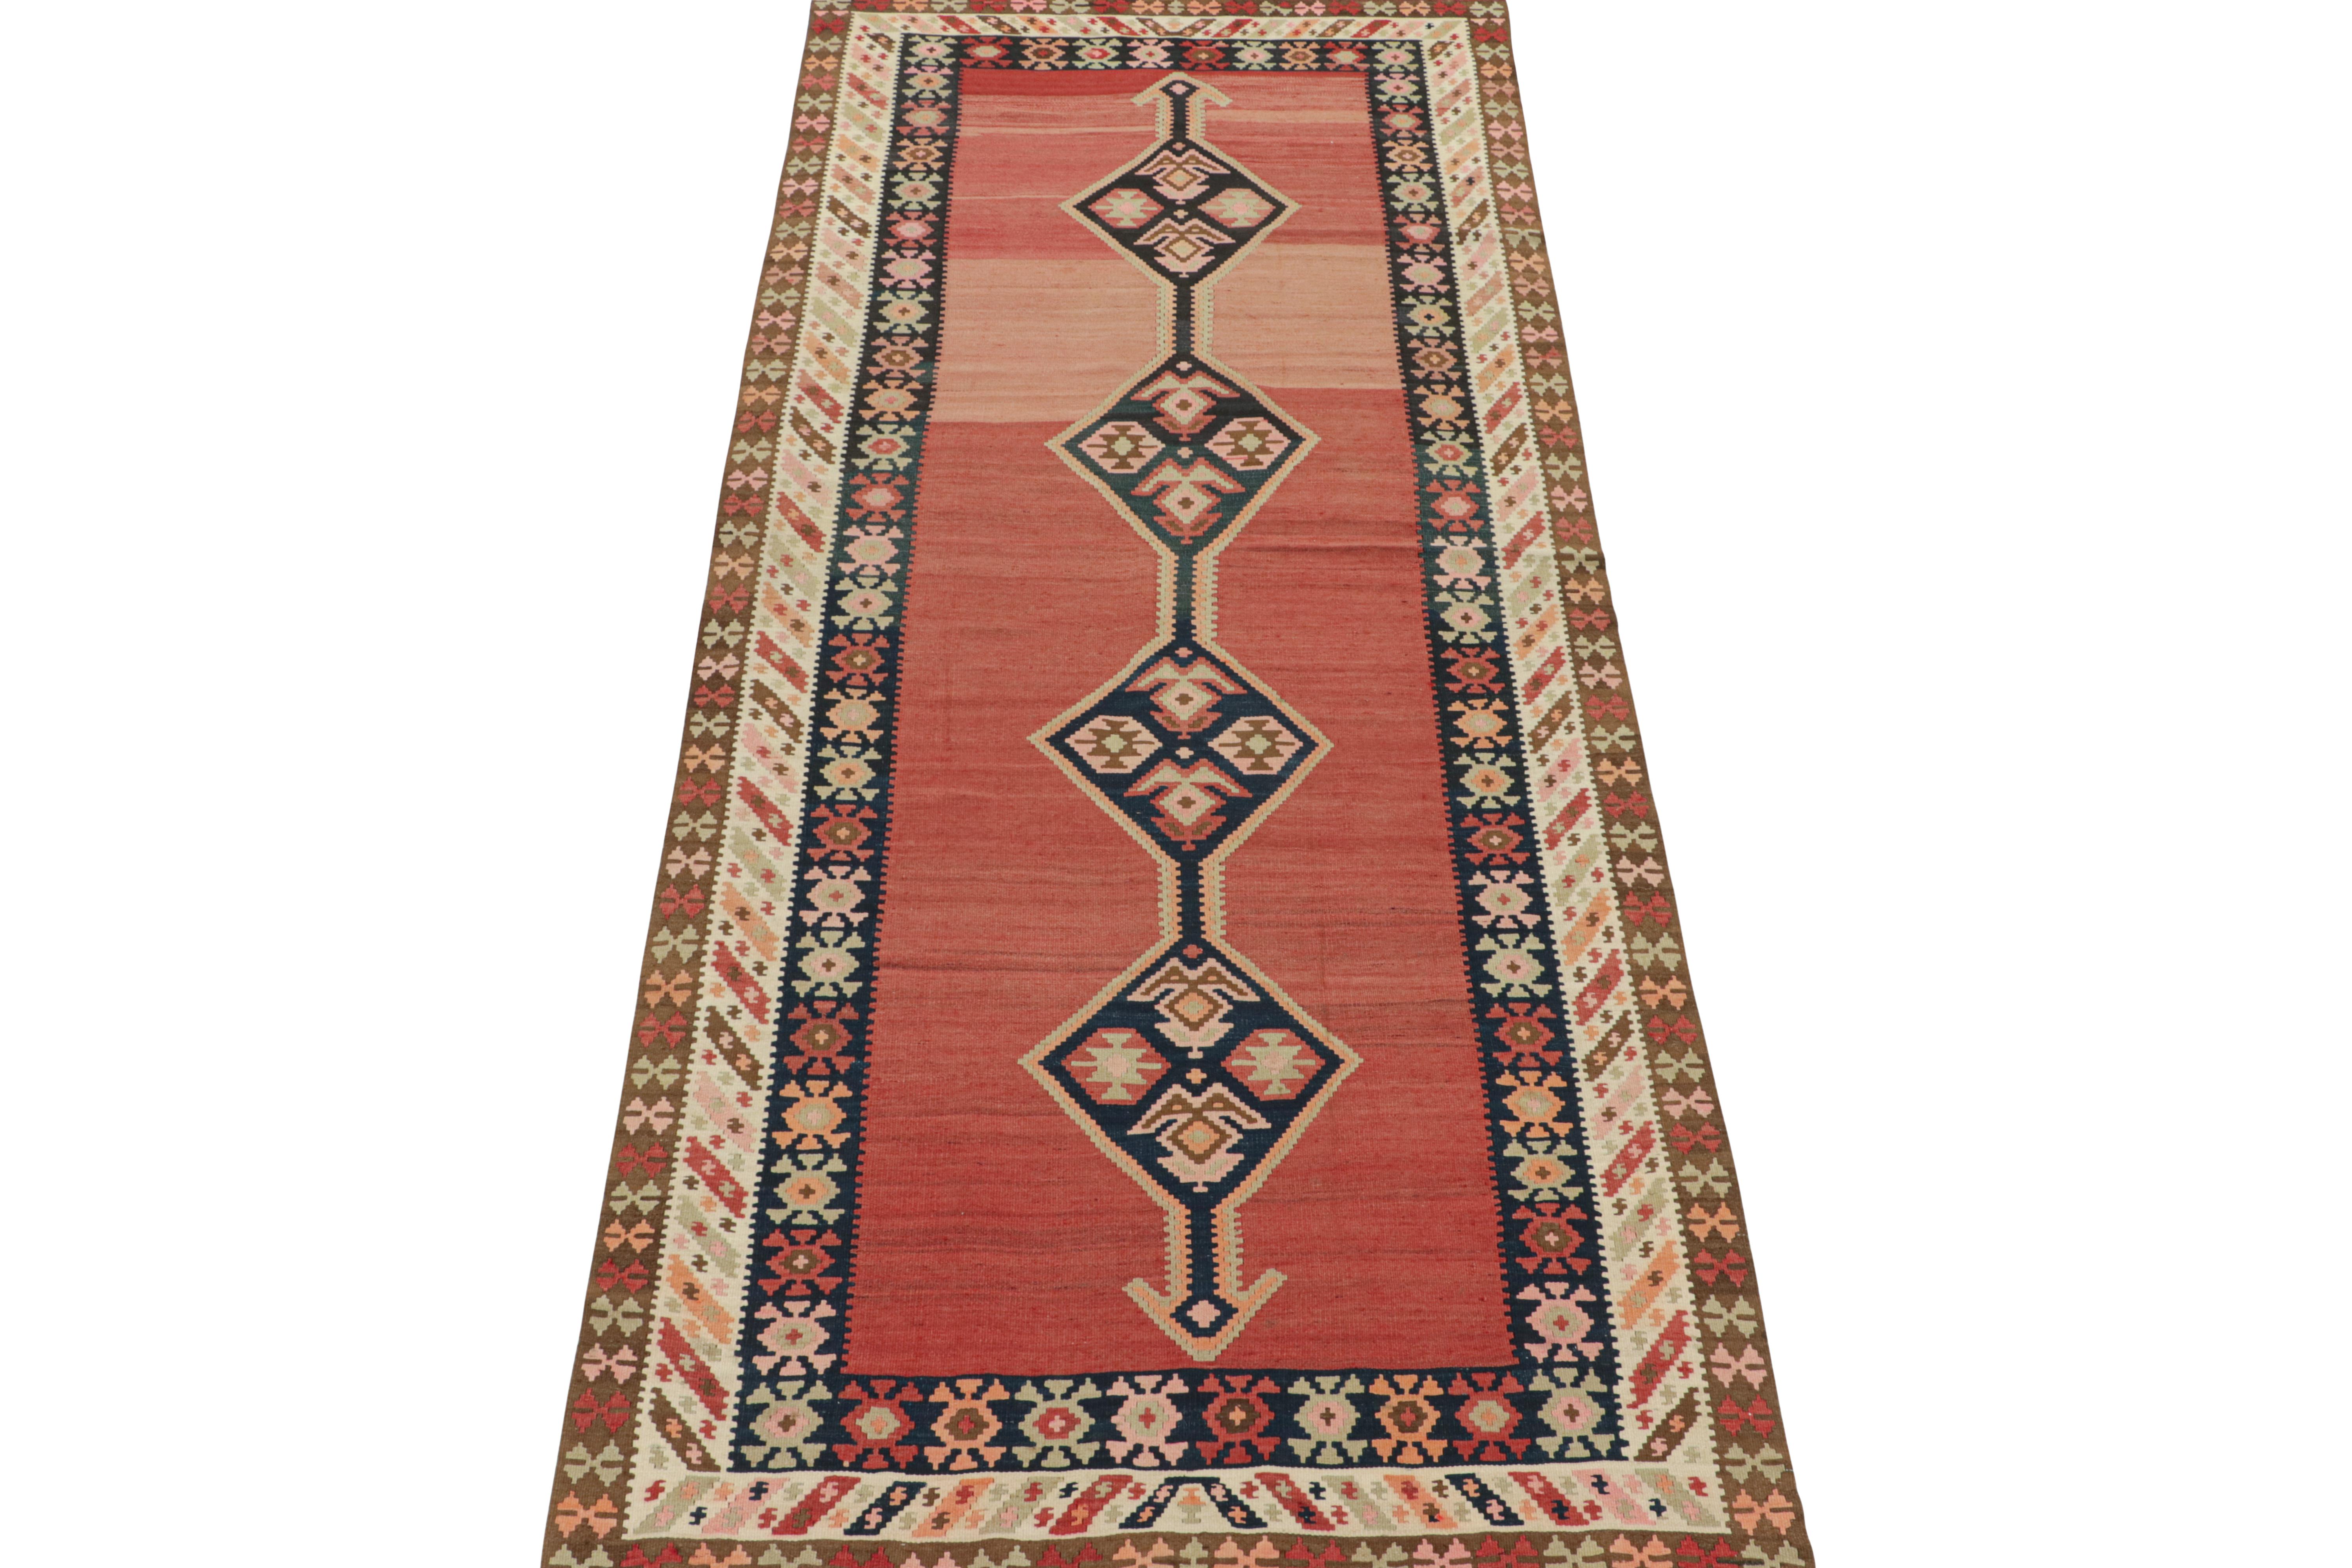 This vintage 5x13 Persian kilim is believed to be a Shahsavan tribal rug—handwoven in wool circa 1950-1960. 

Further on the Design:

The design prefers navy blue medallions on a red open field, wrapped in polychromatic borders with finely woven